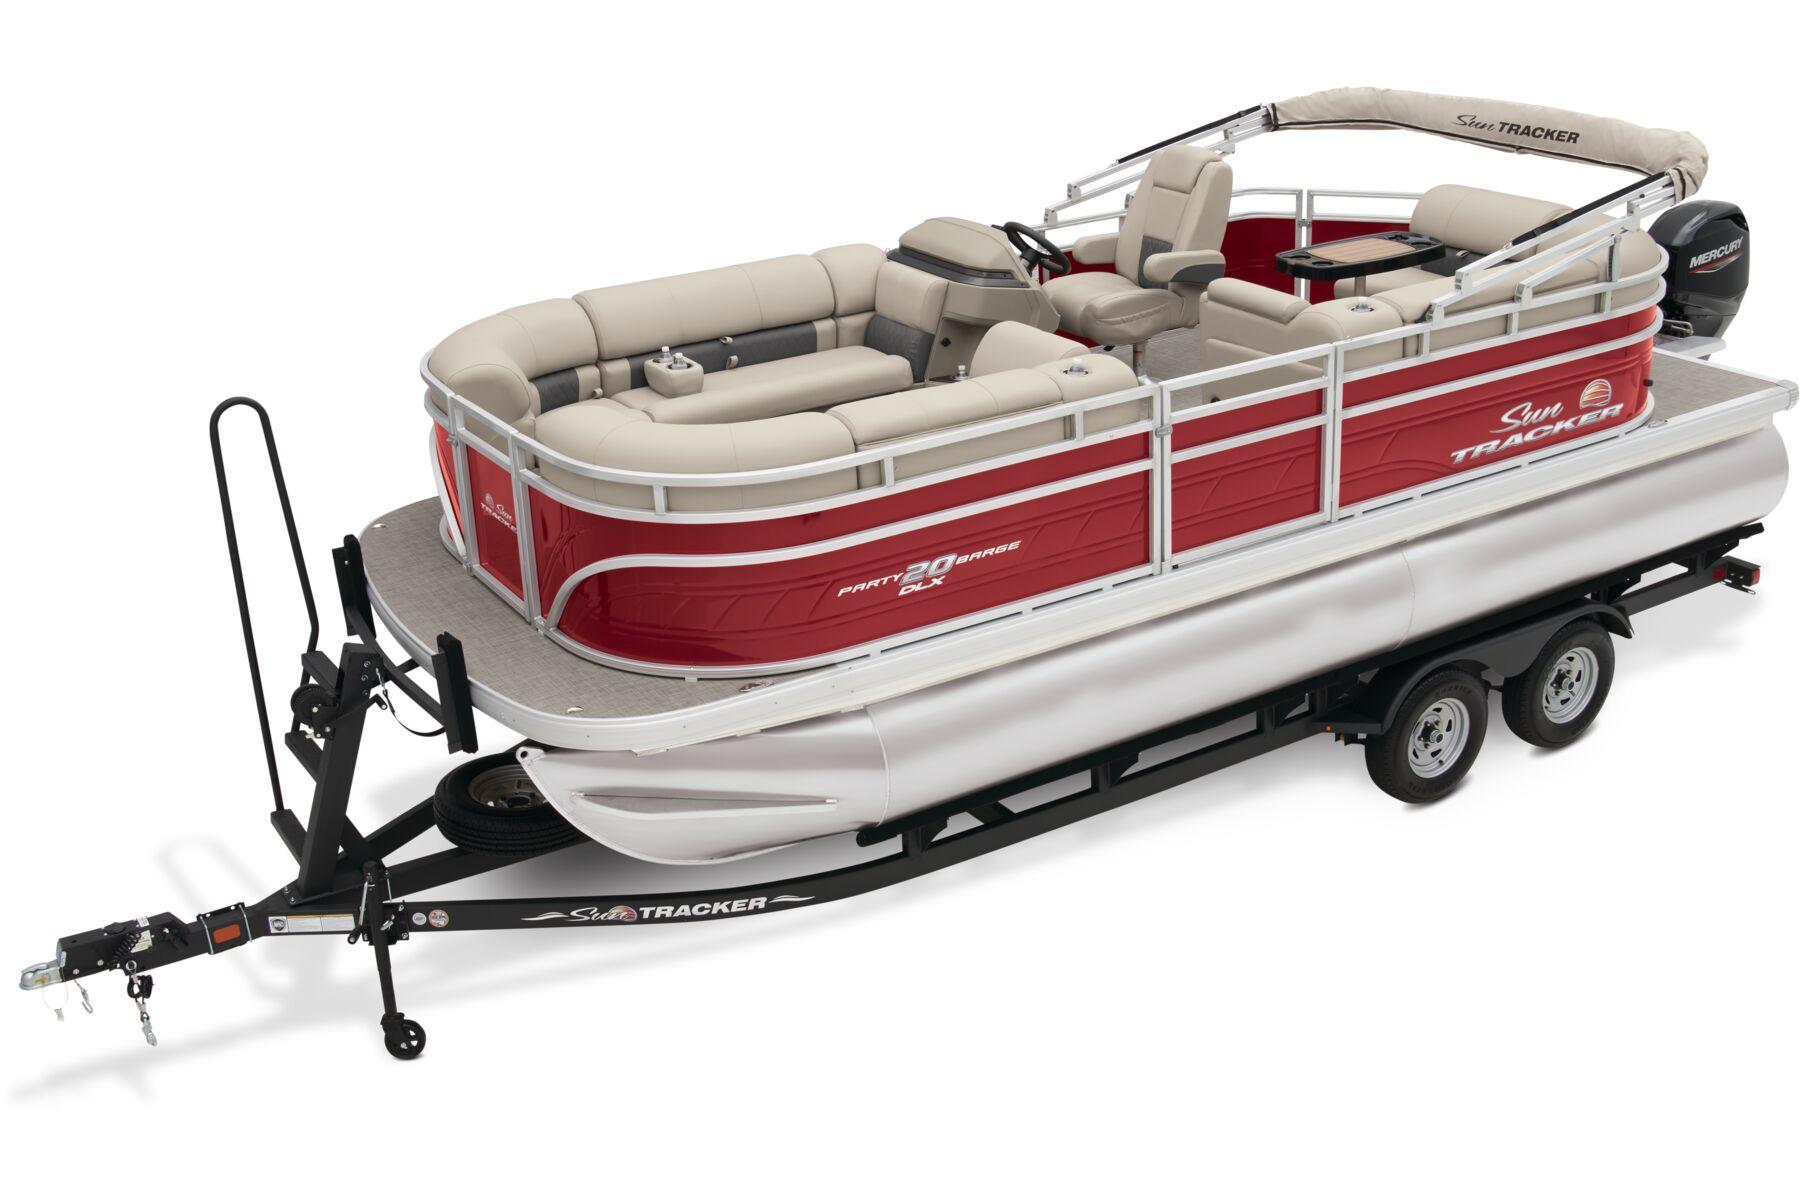 Pontoon boats for sale in California - Boat Trader